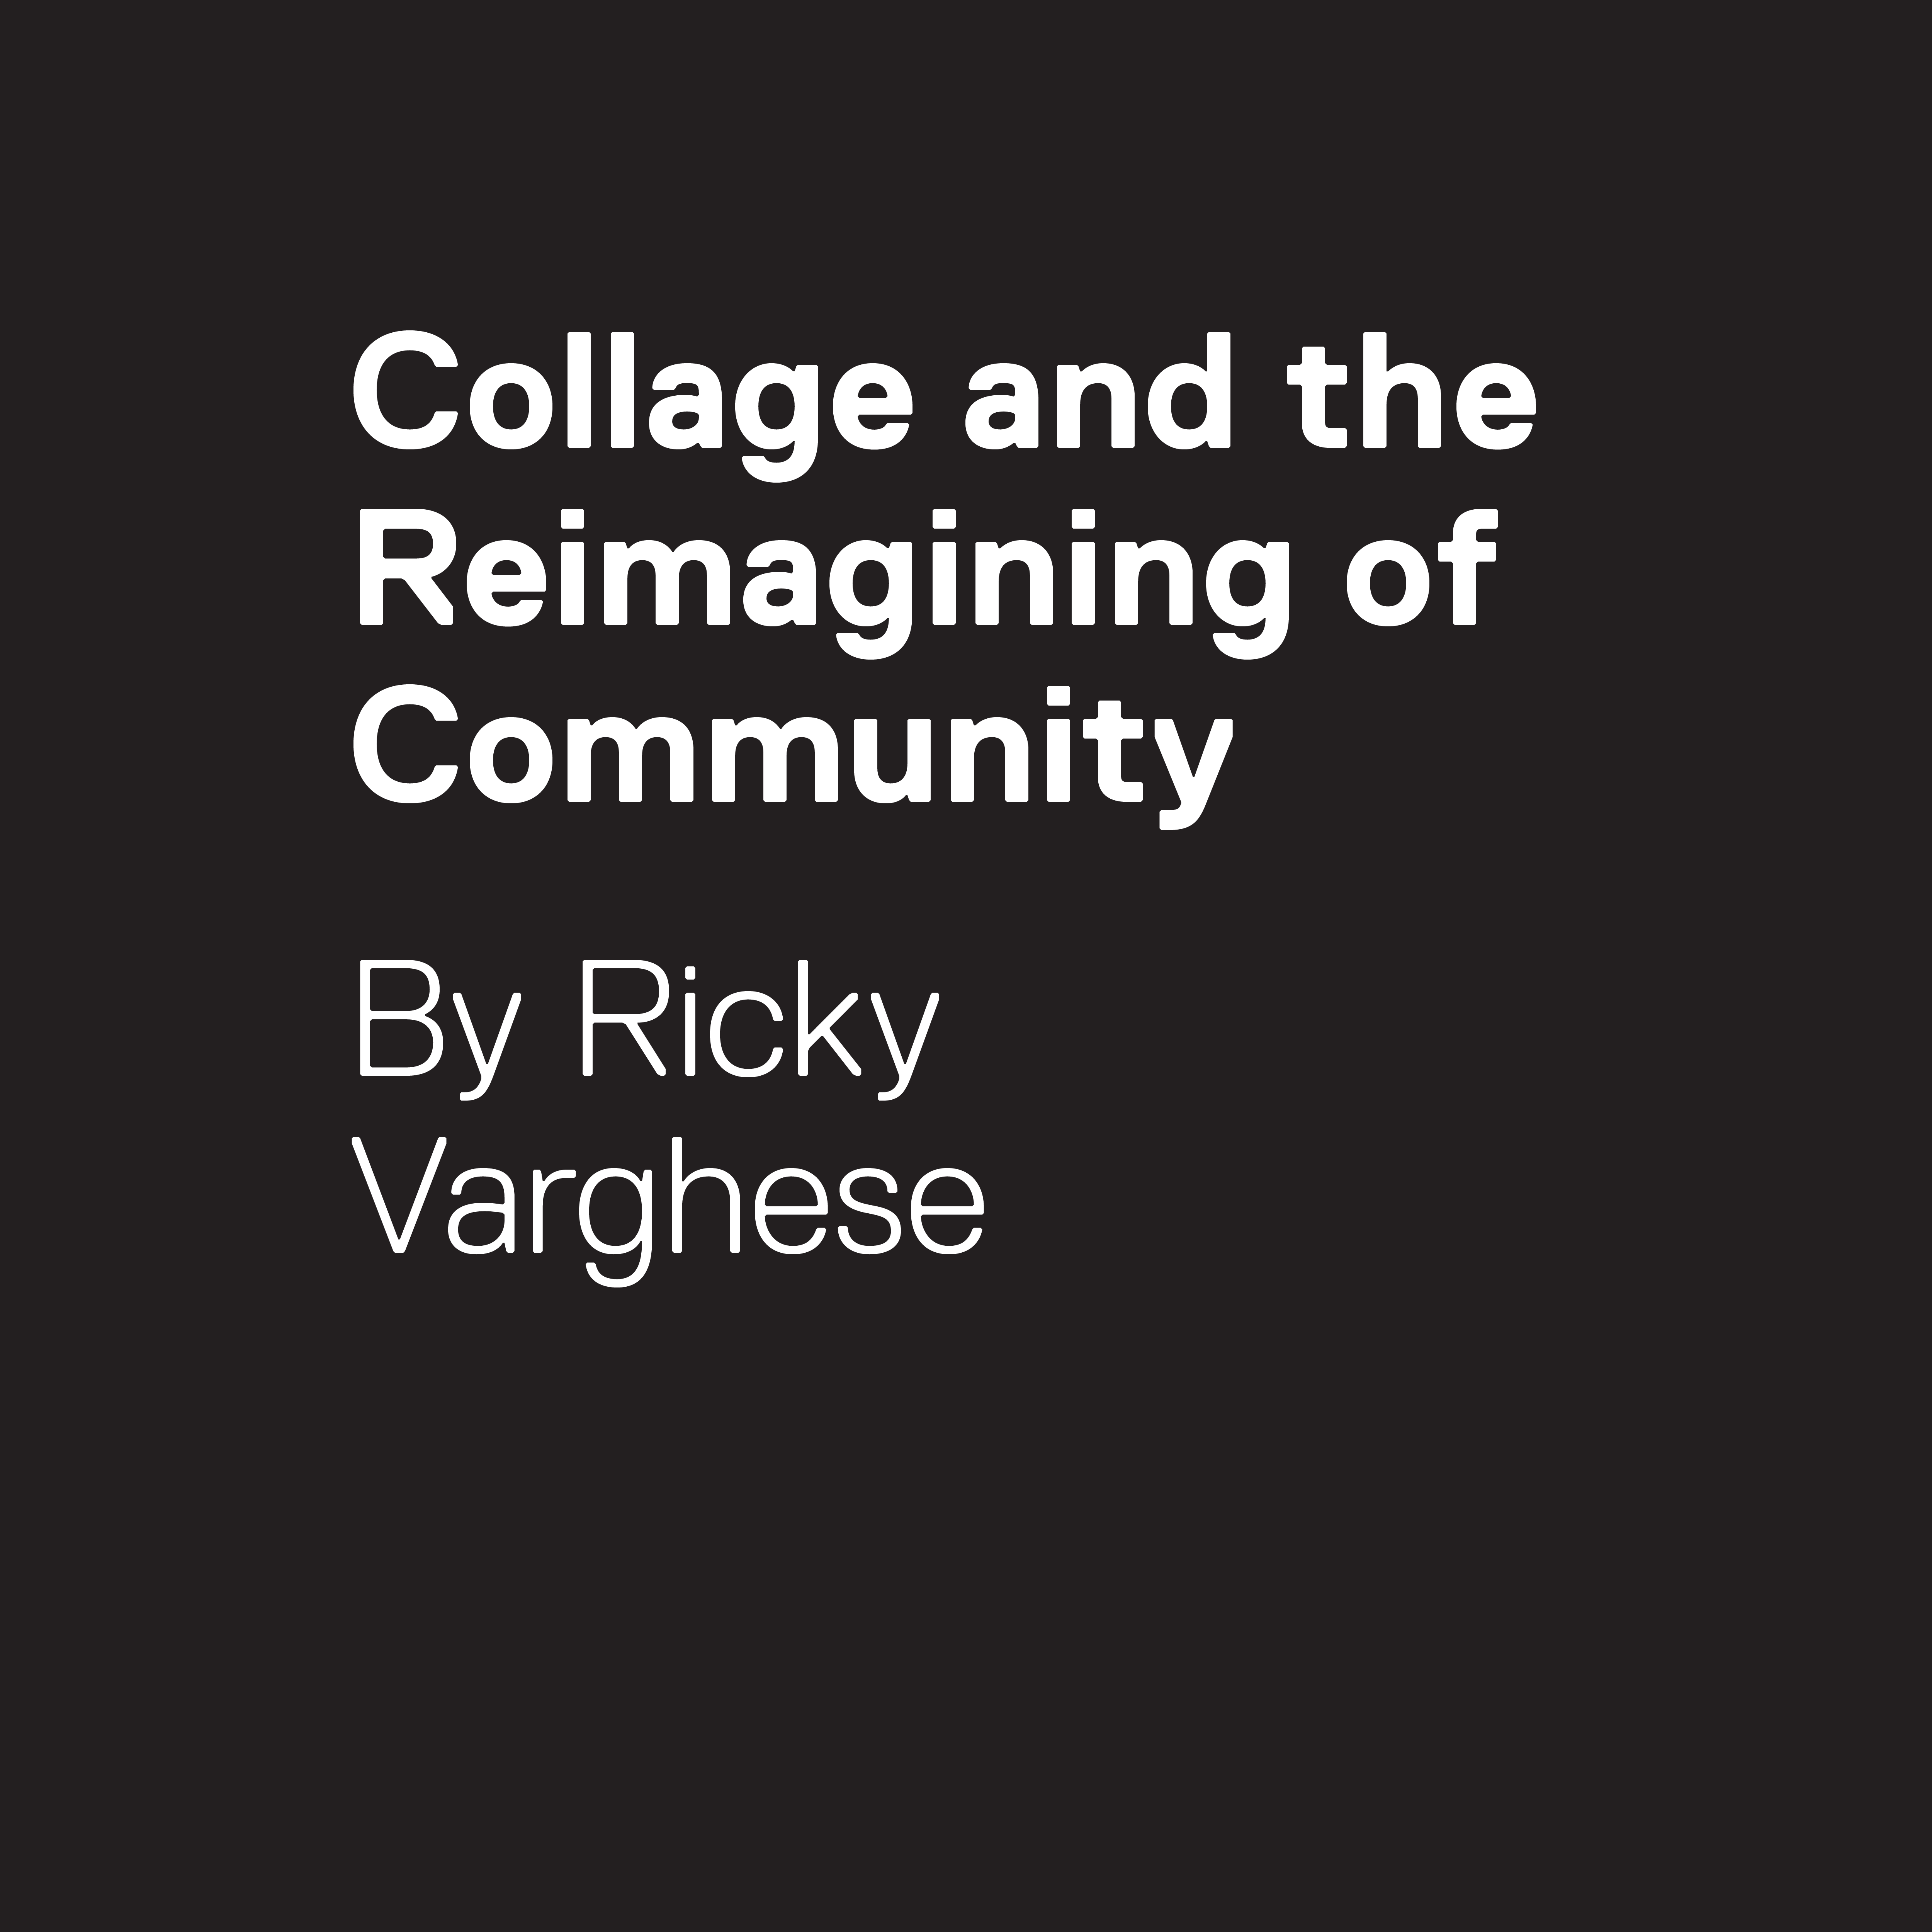 Collage and the Reimagining of Community. By Ricky Varghese.